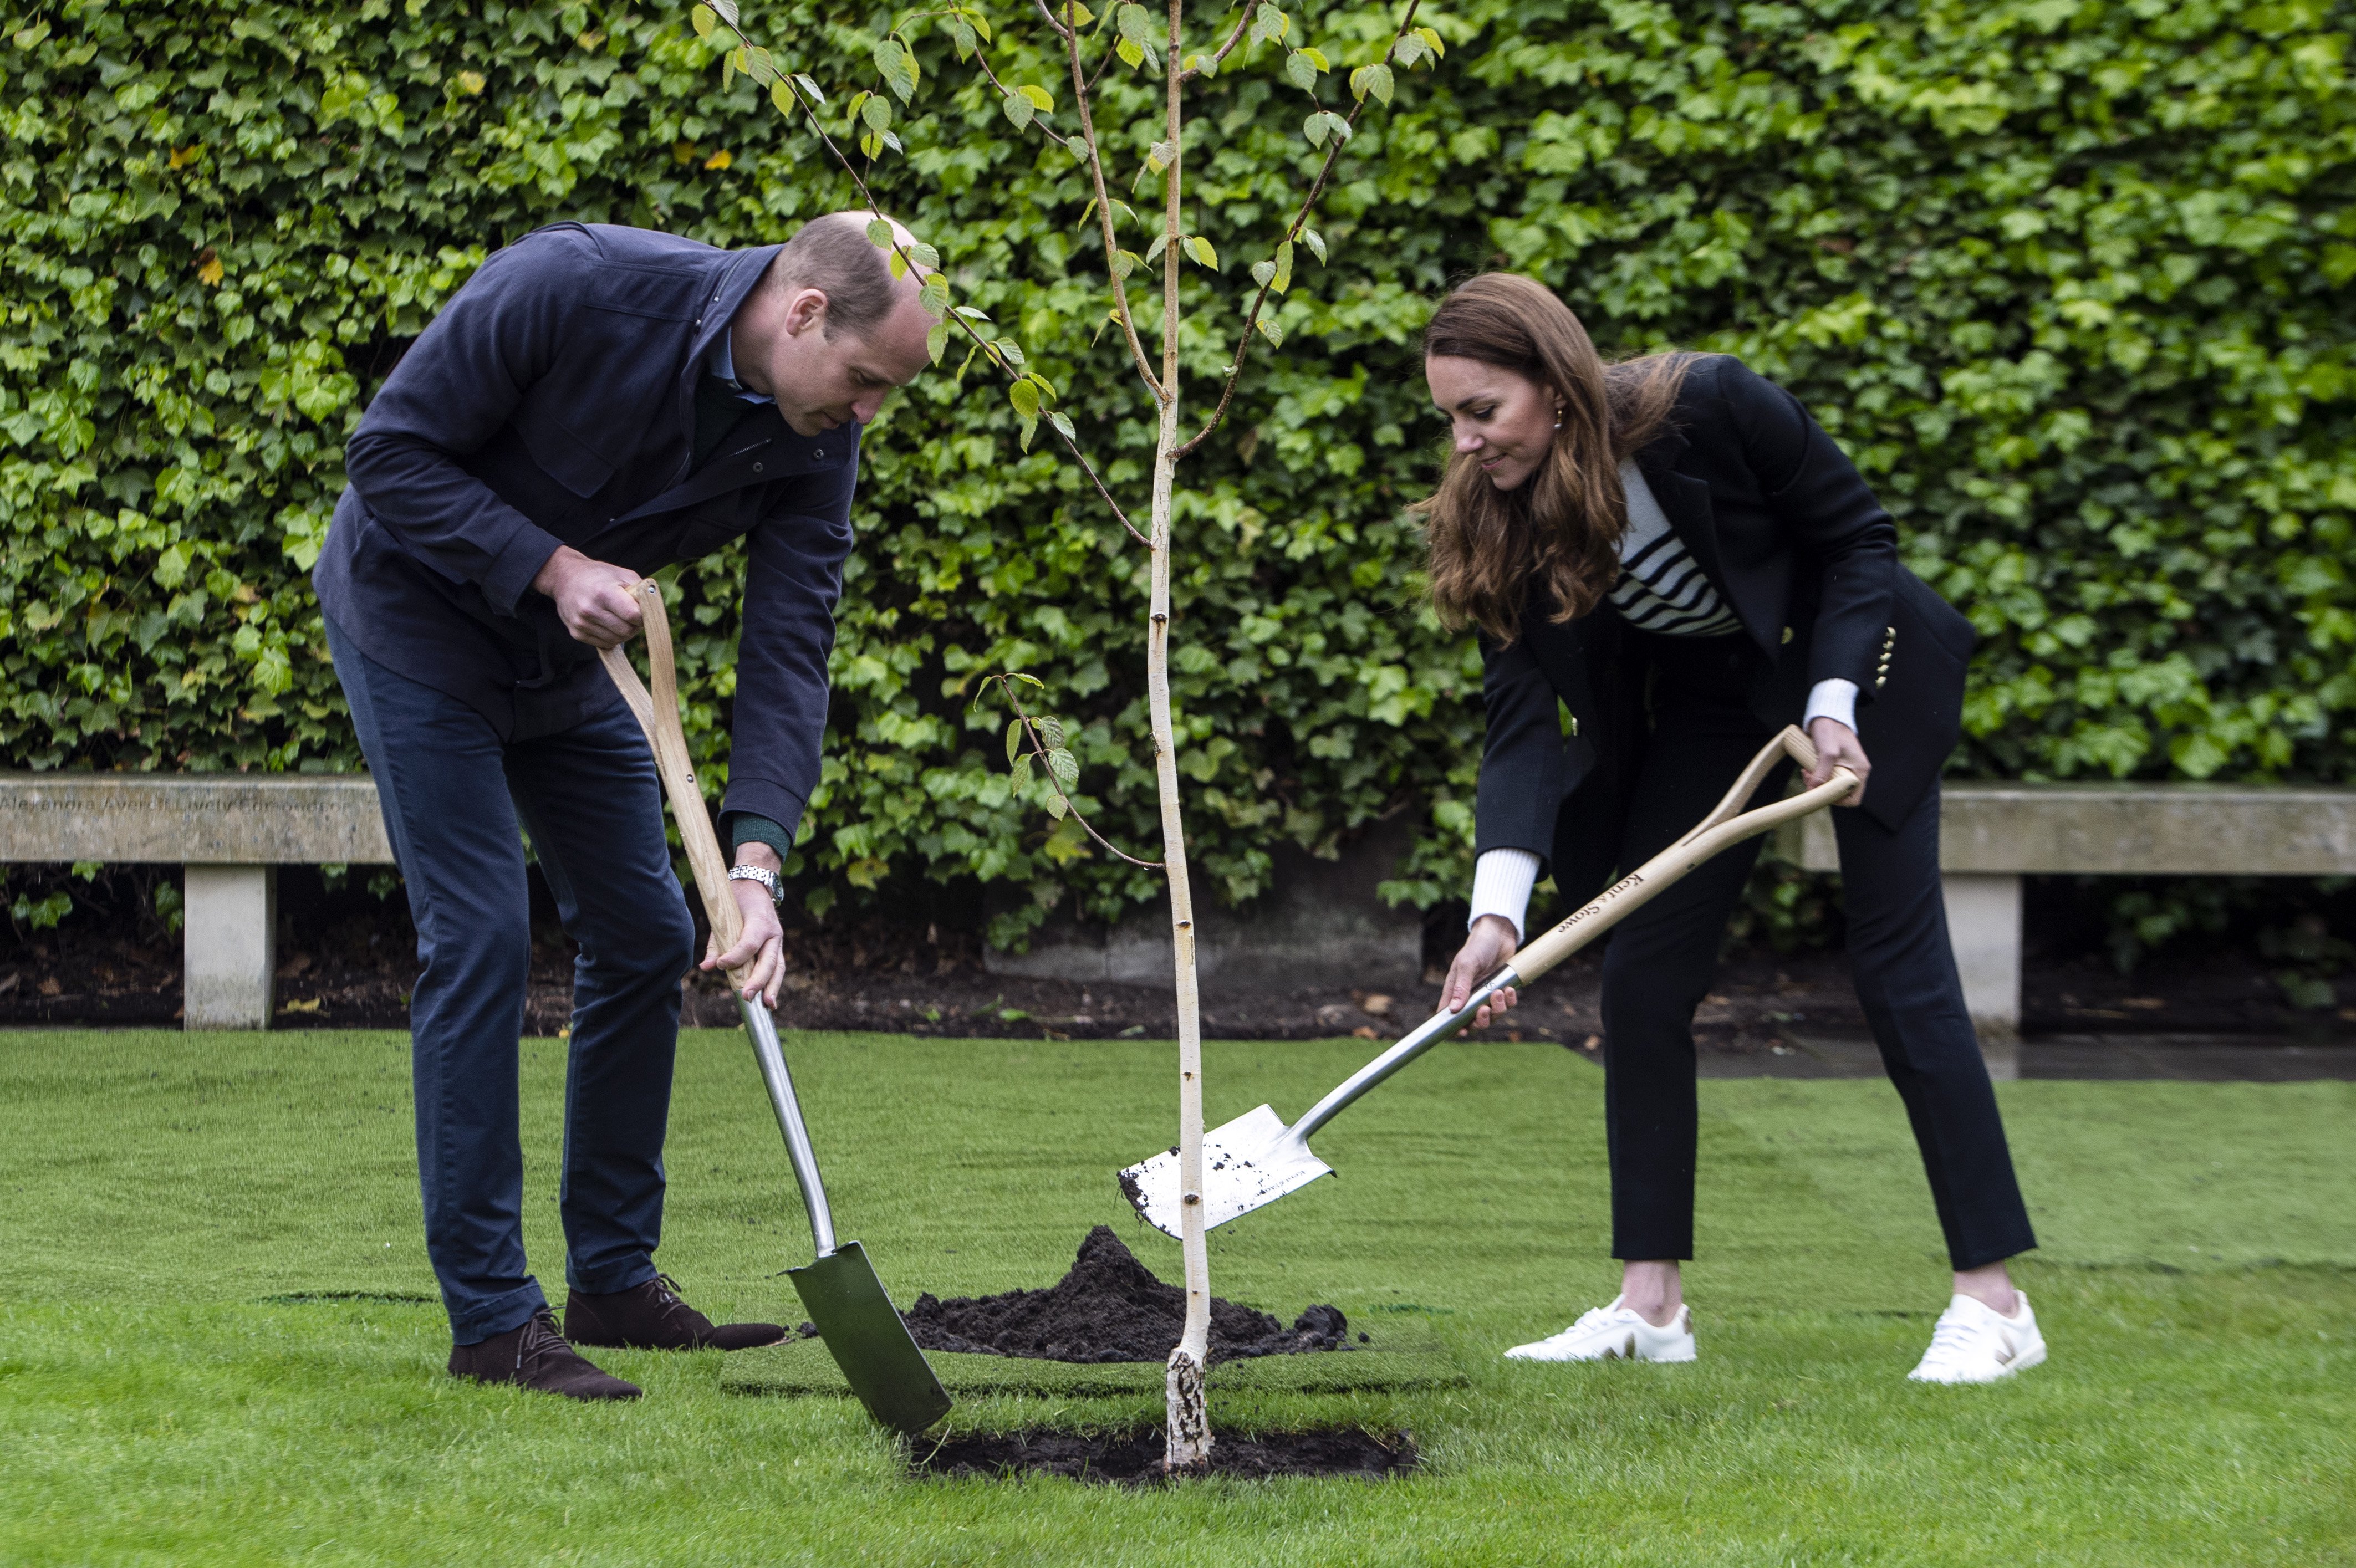 Prince William and Kate Middleton partaking in planting a tree during a visit to the University of St Andrews on May 26, 2021 in St Andrews, Scotland. / Source: Getty Images